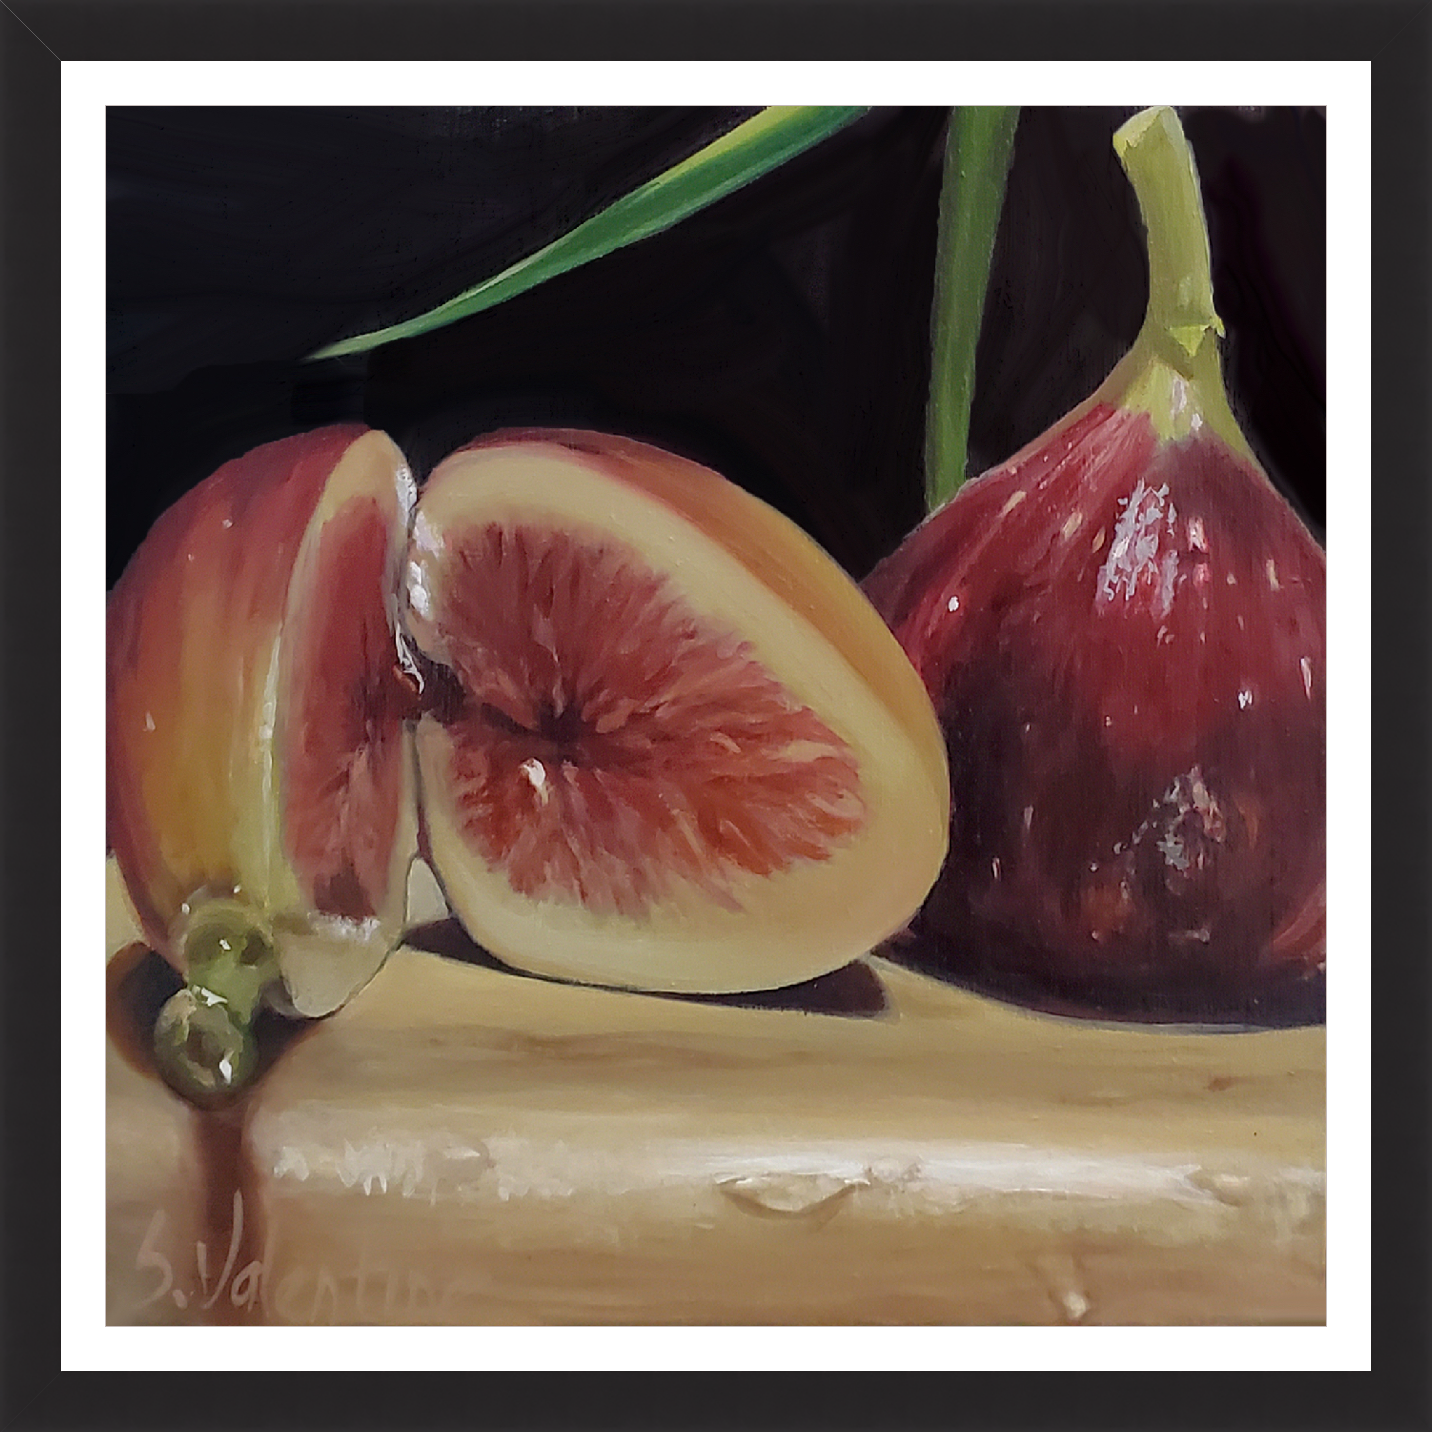 Figs Inside & Out – print by Susan Valentine